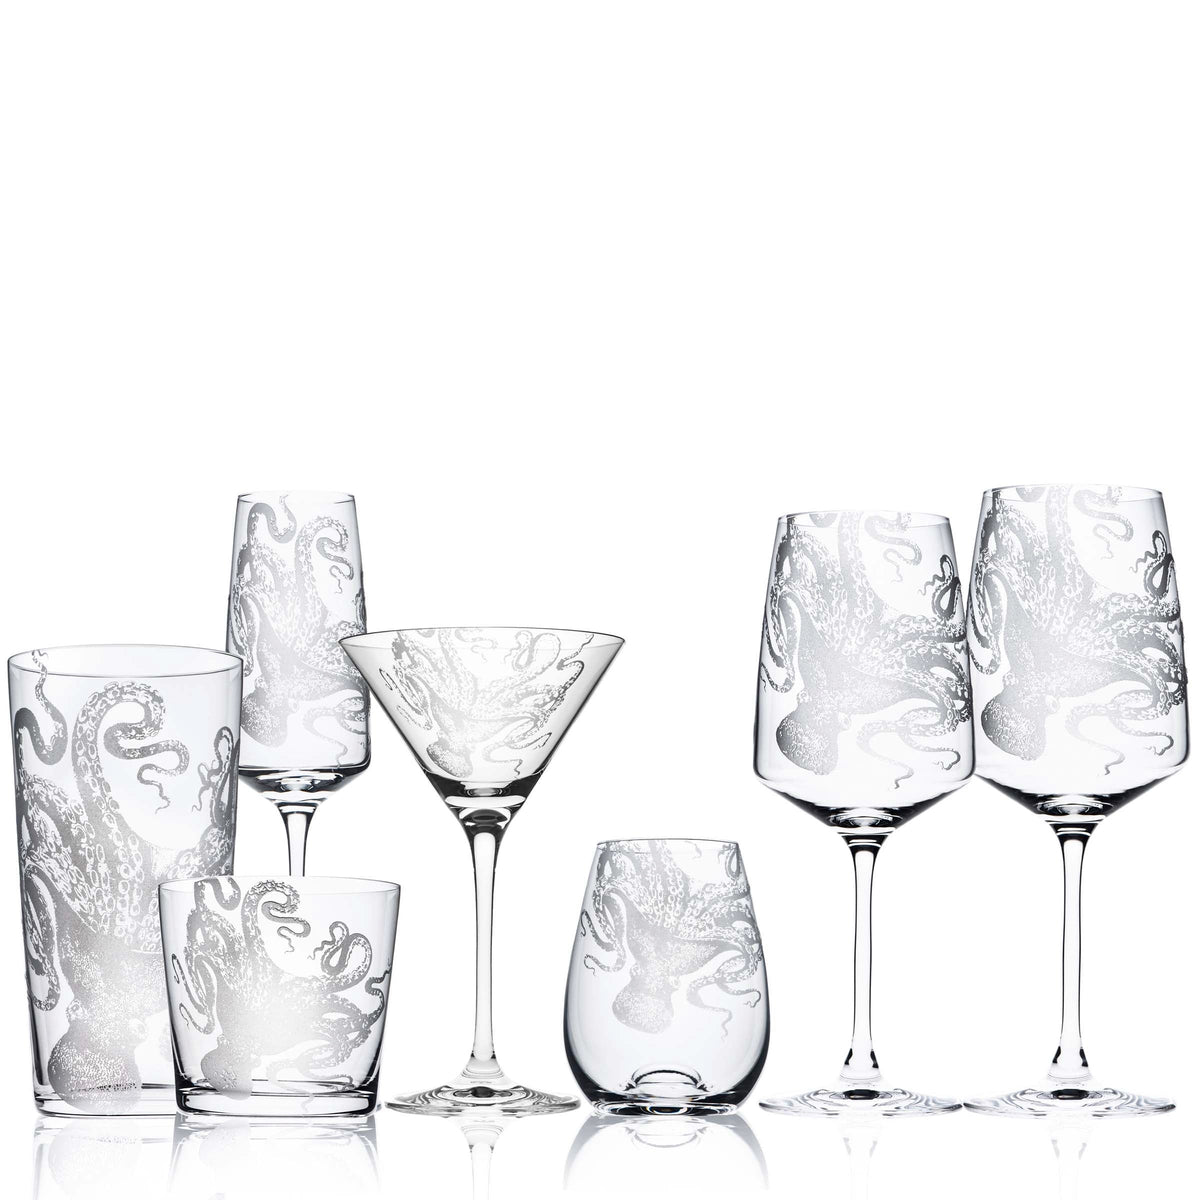 A set of Lucy Red Wine Glasses by Caskata Artisanal Home, featuring intricate designs on stemmed glasses. Hand washing recommended for optimal care.